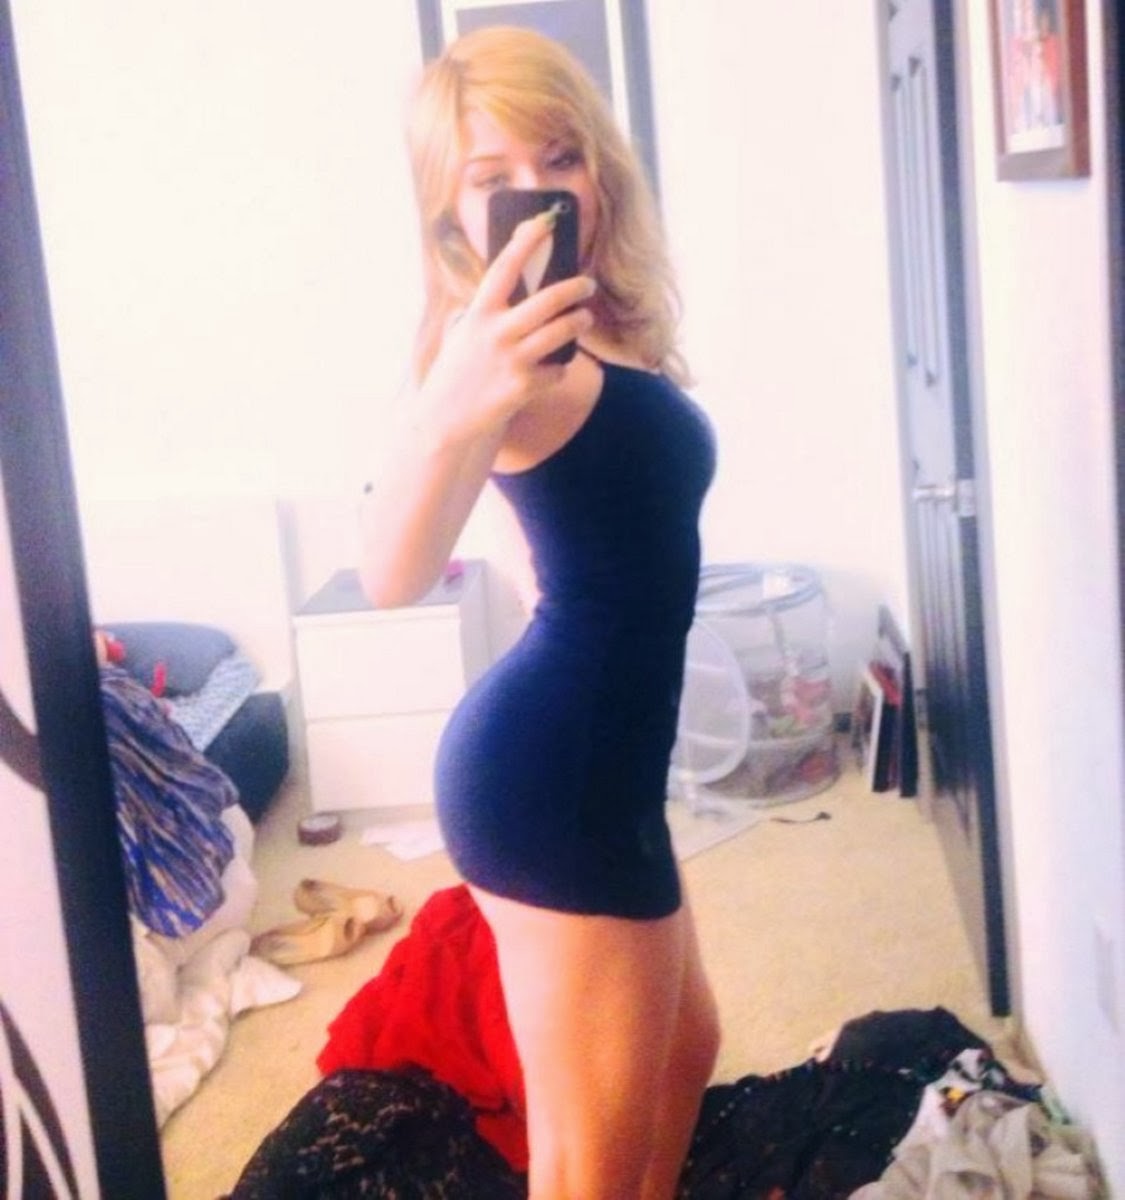 Mccurdy leaked nudes jennette NSFW